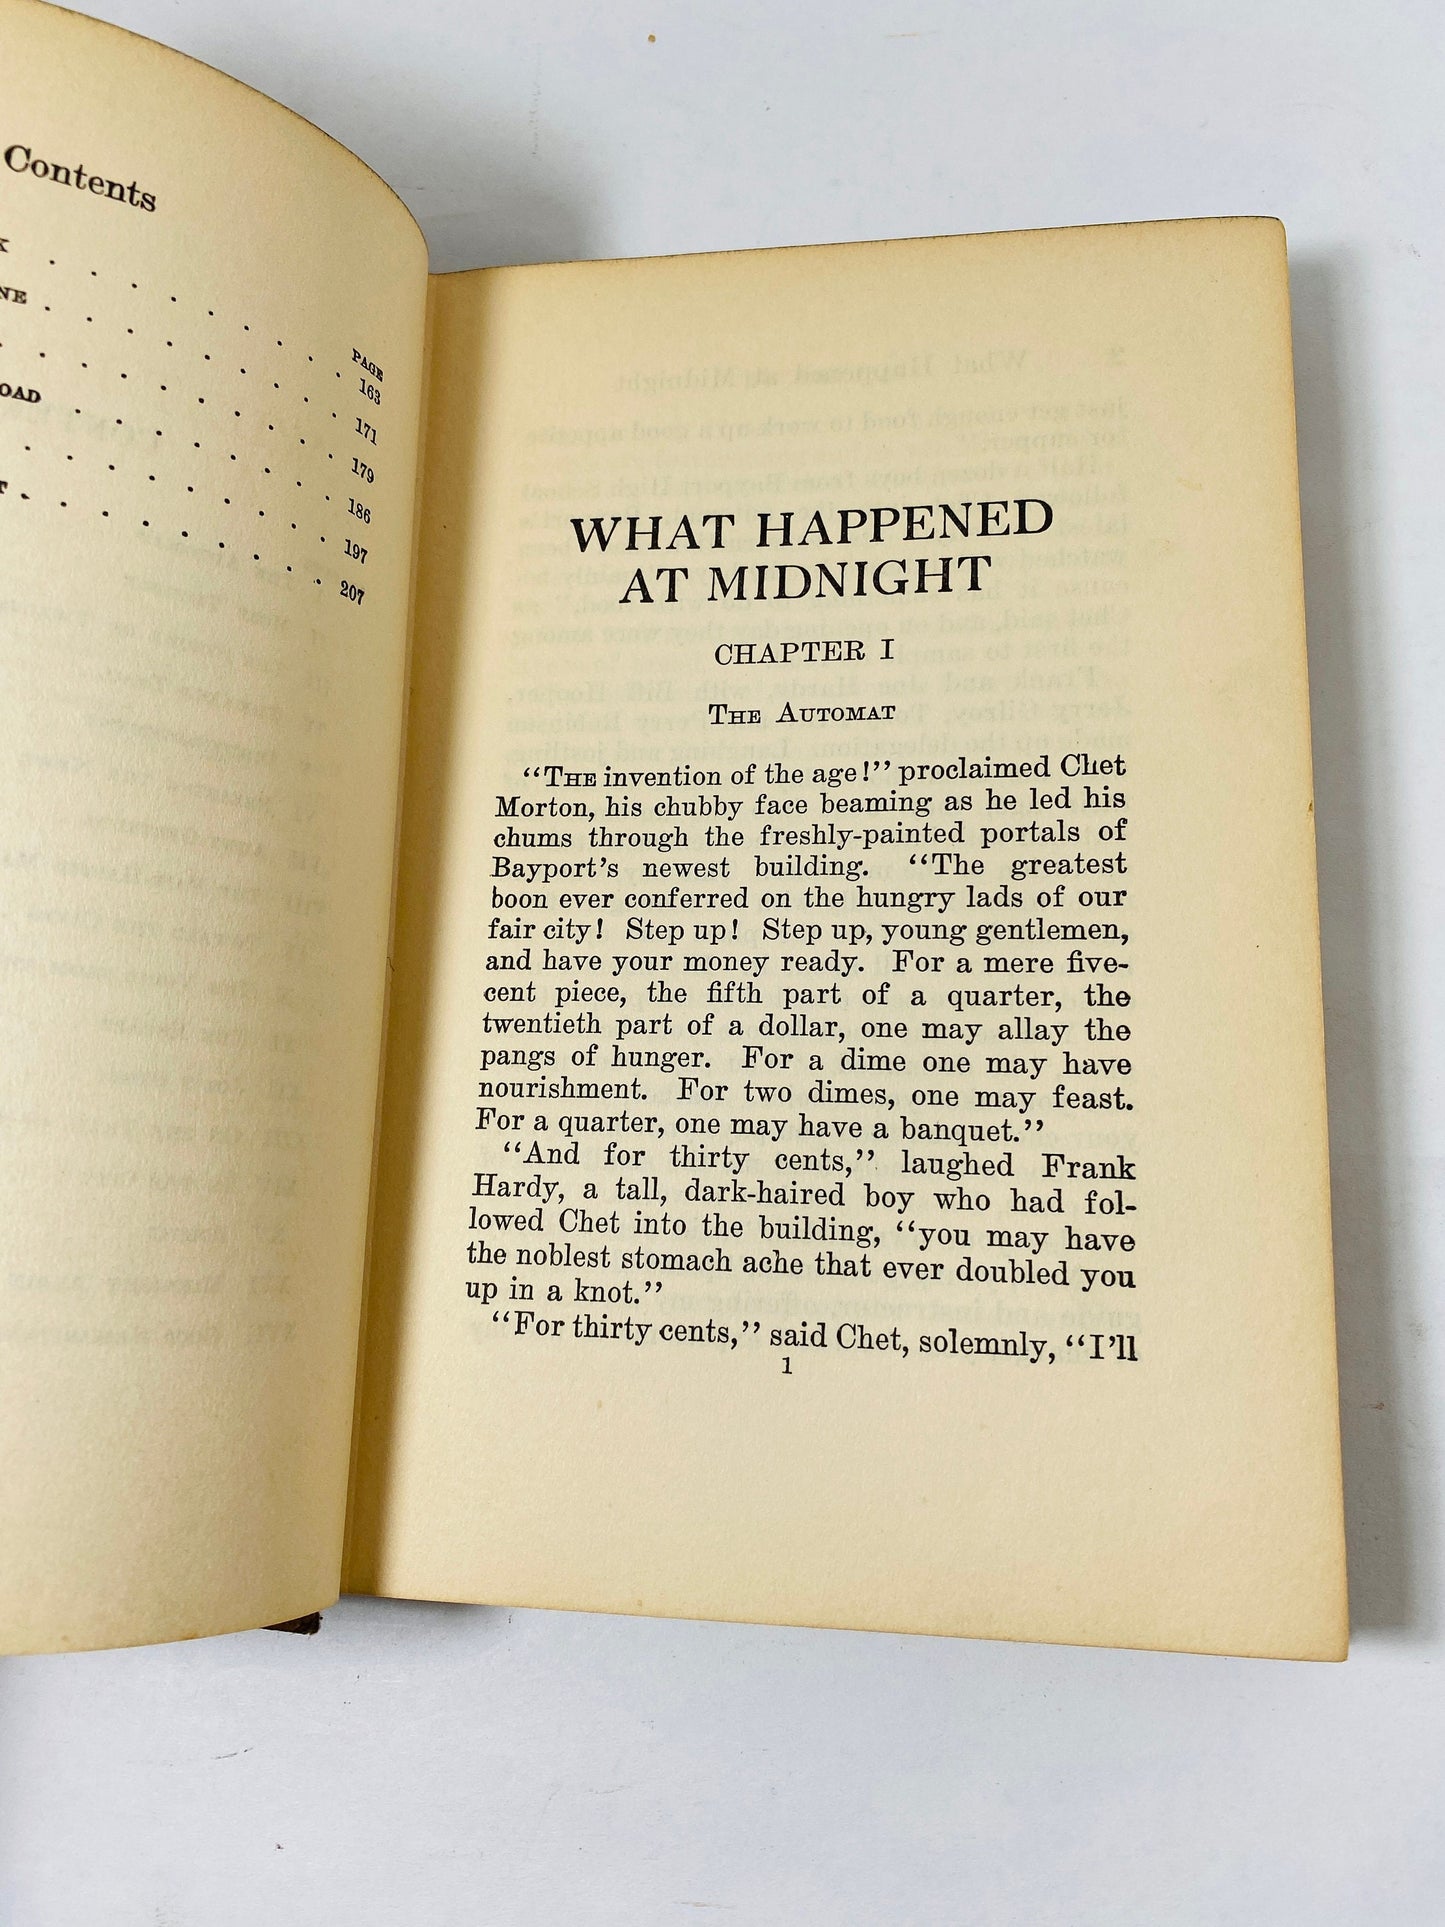 1931 Vintage Hardy Boys book Franklin Dixon What Happened at Midnight brown cover antique collectible gift